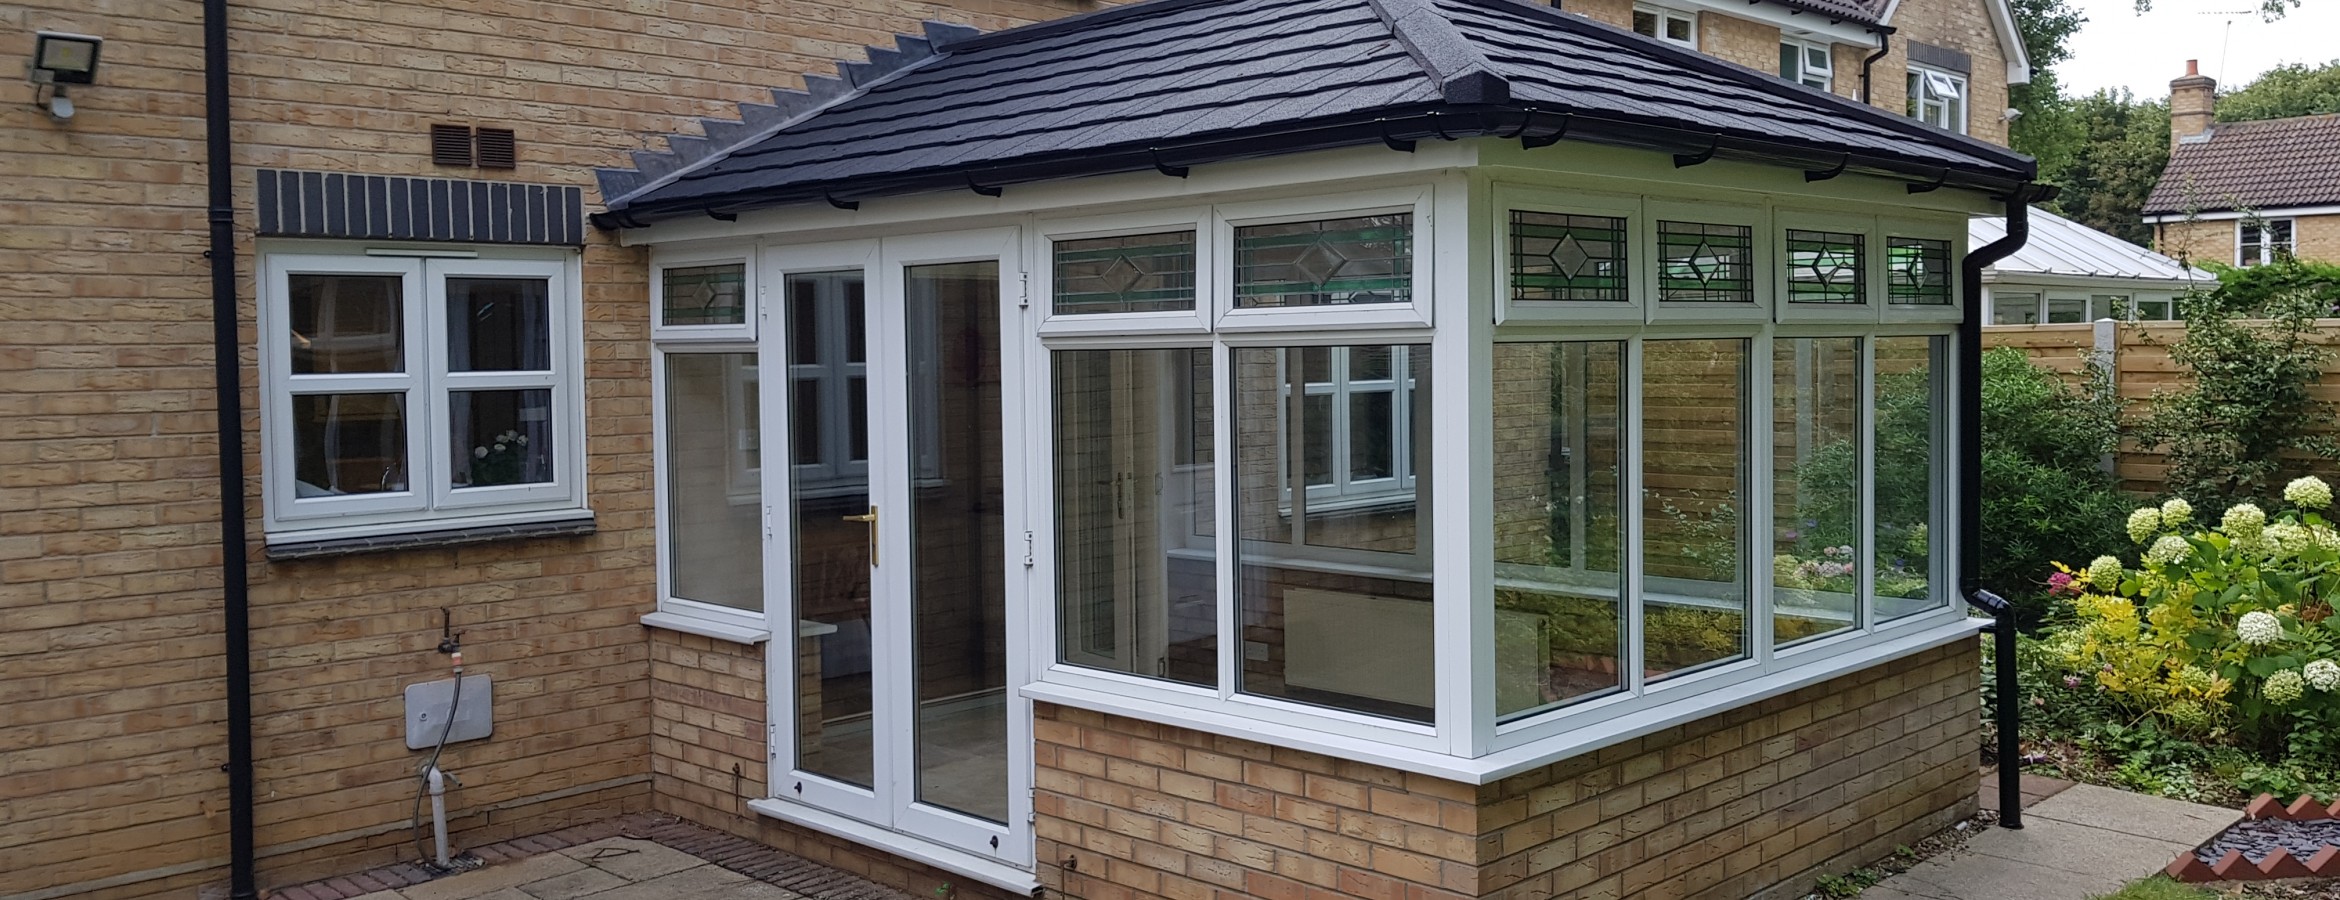 A new conservatory with a warmroof